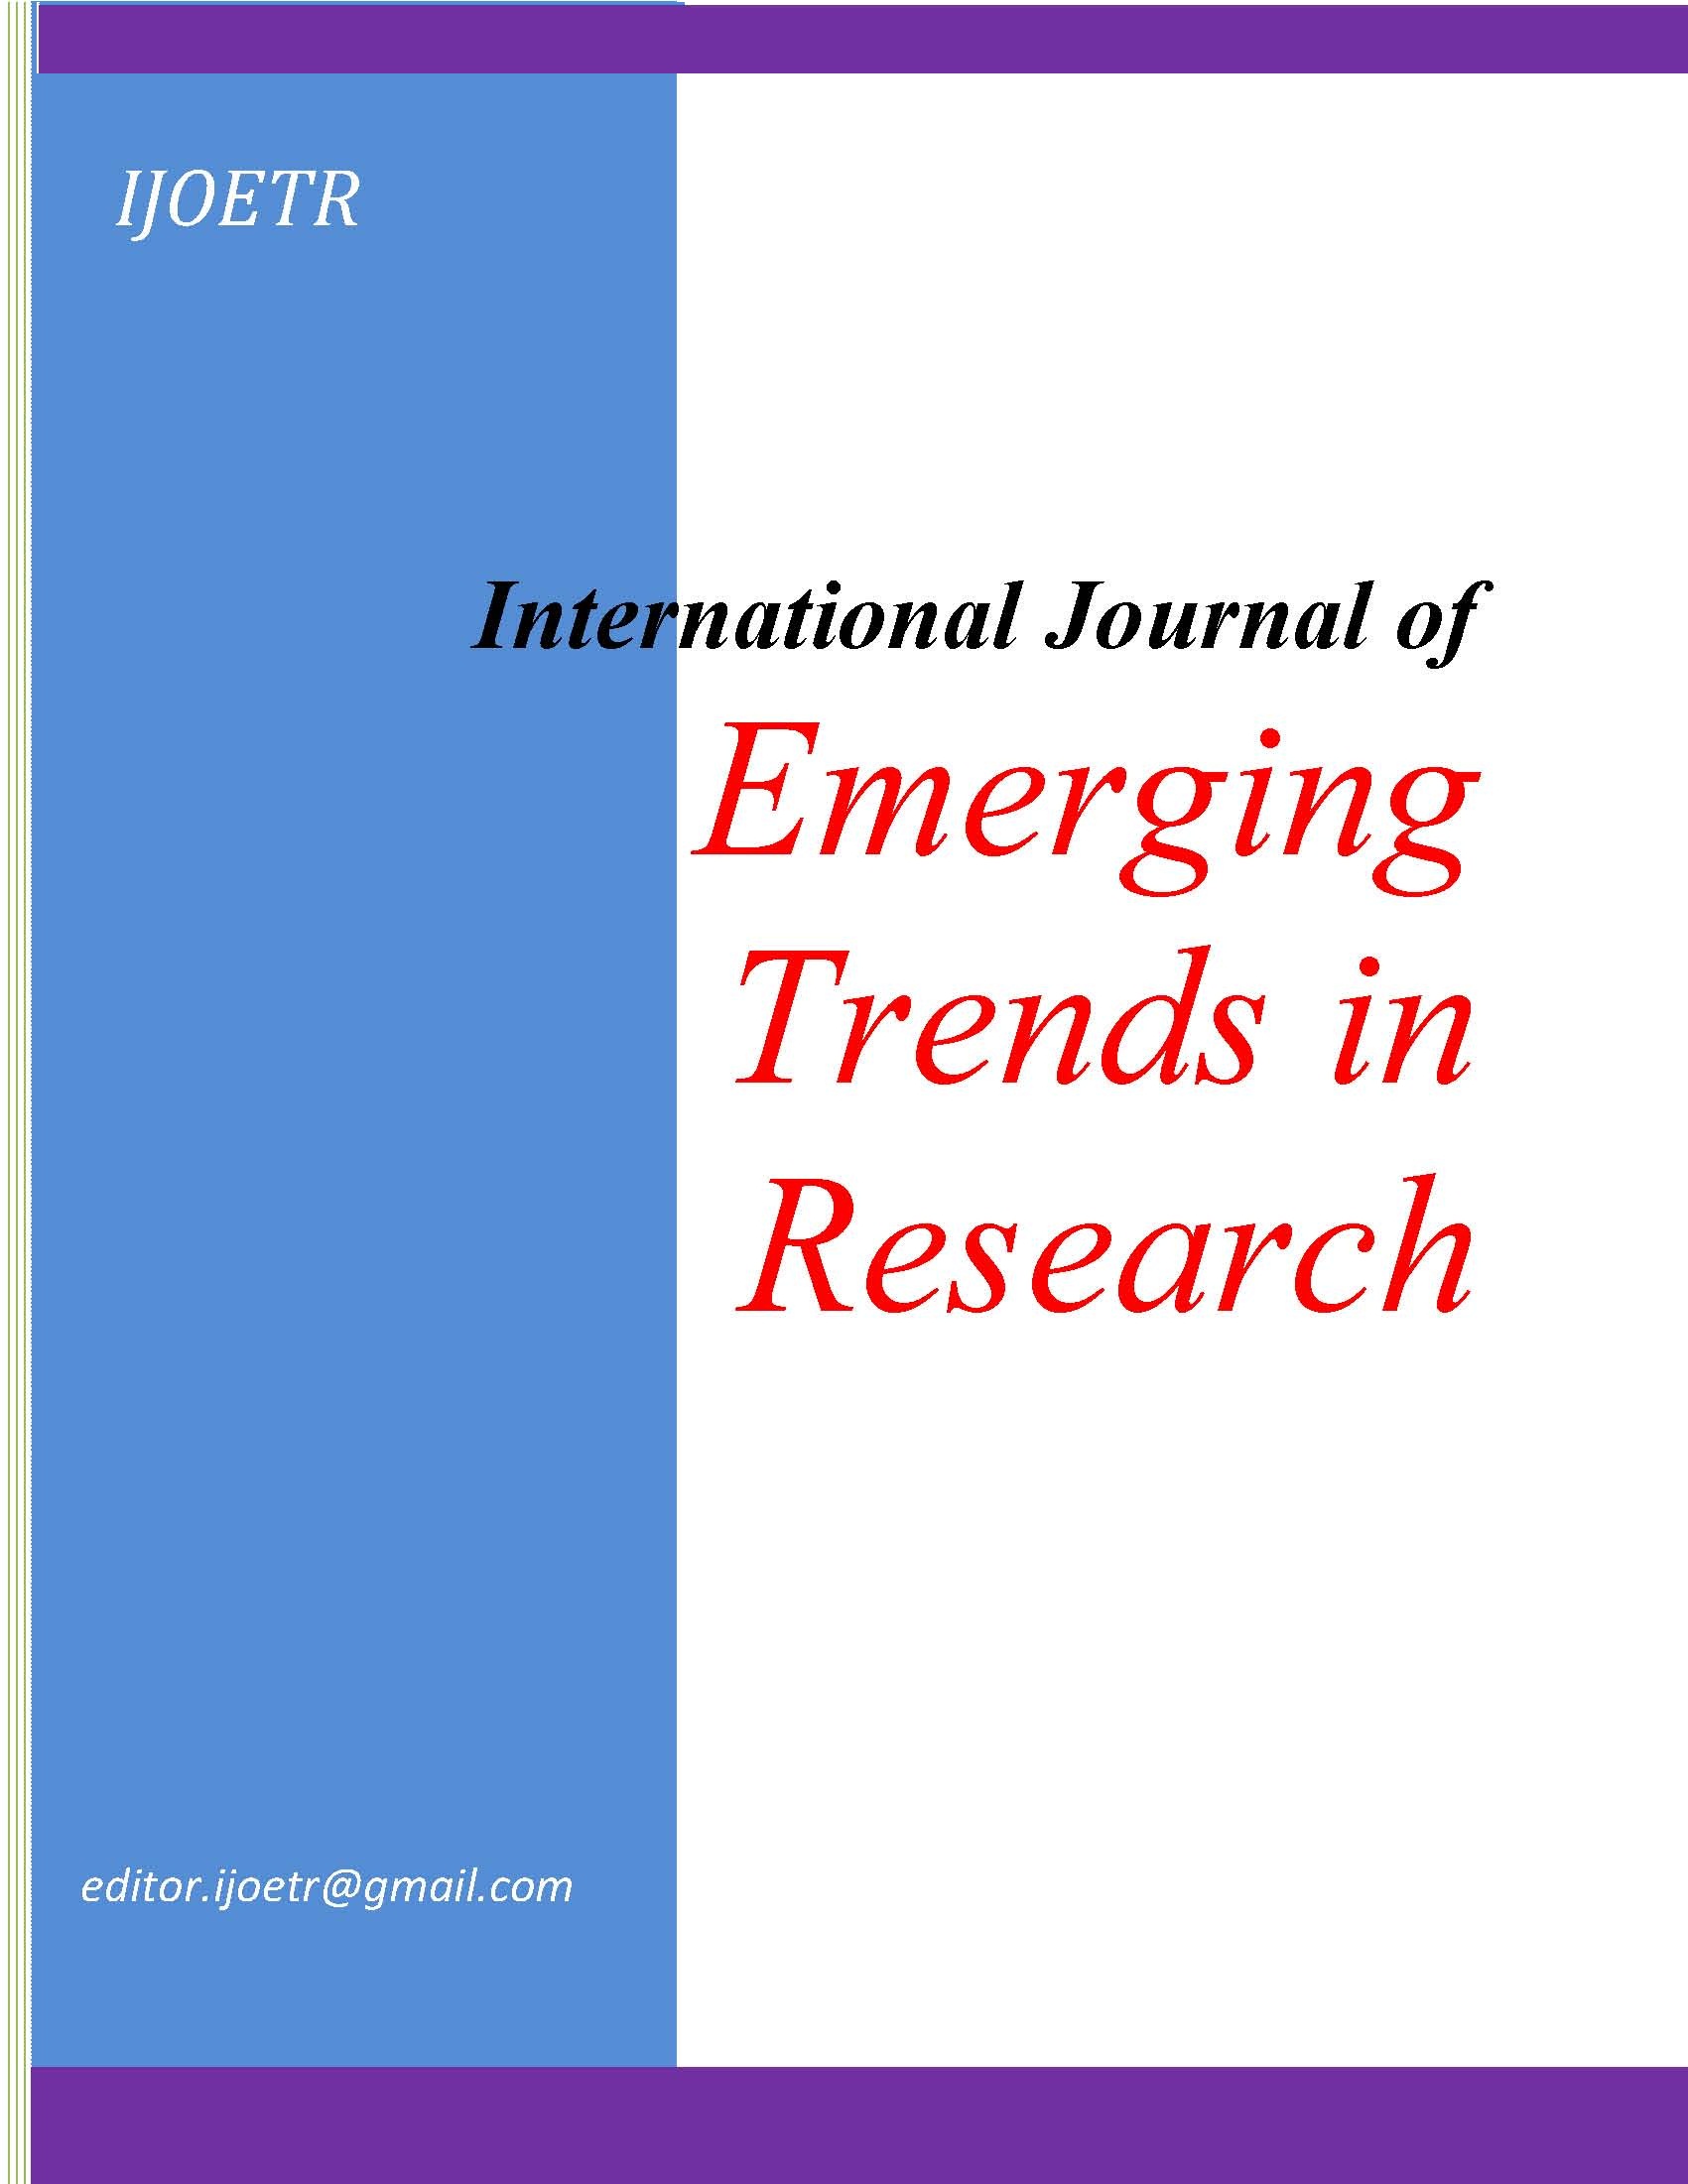 International Journal of Emerging Trends in Research